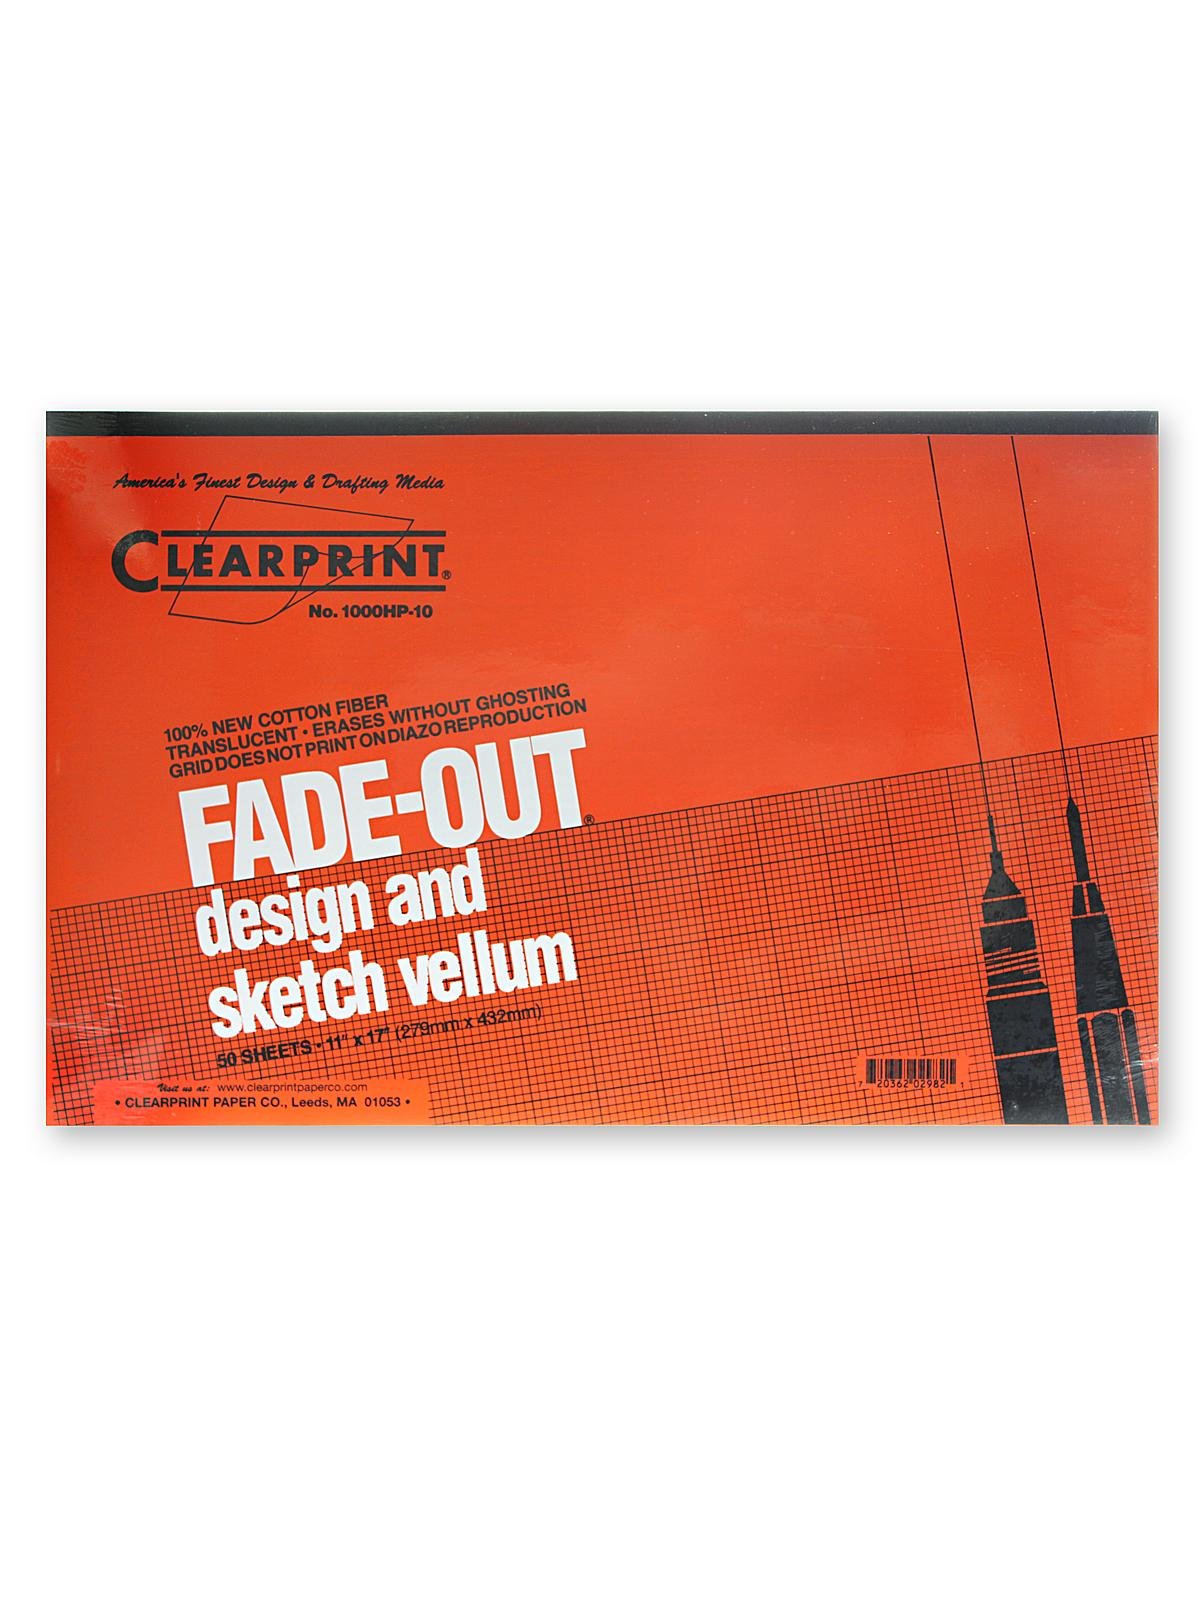 Clearprint - Fade-Out Design and Sketch Vellum - Grid Pad